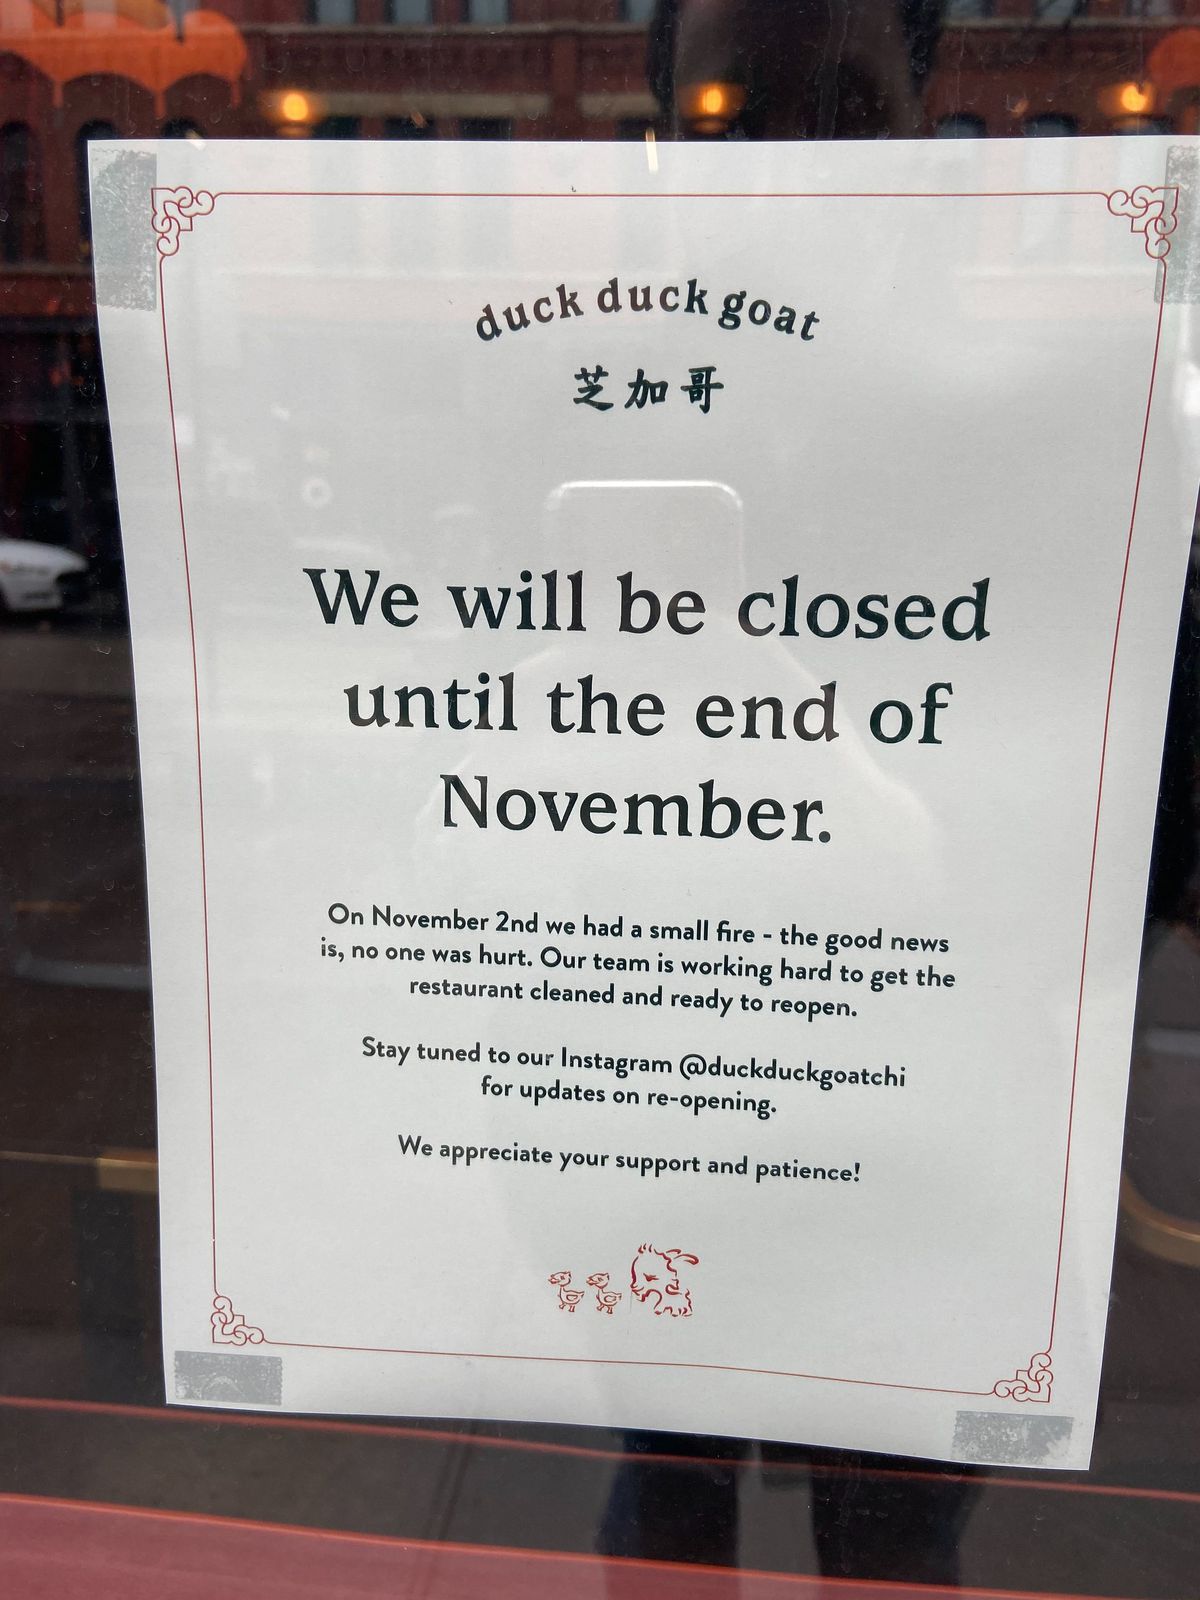 A paper sign taped to a window reads “We will be closed until the end of November.”